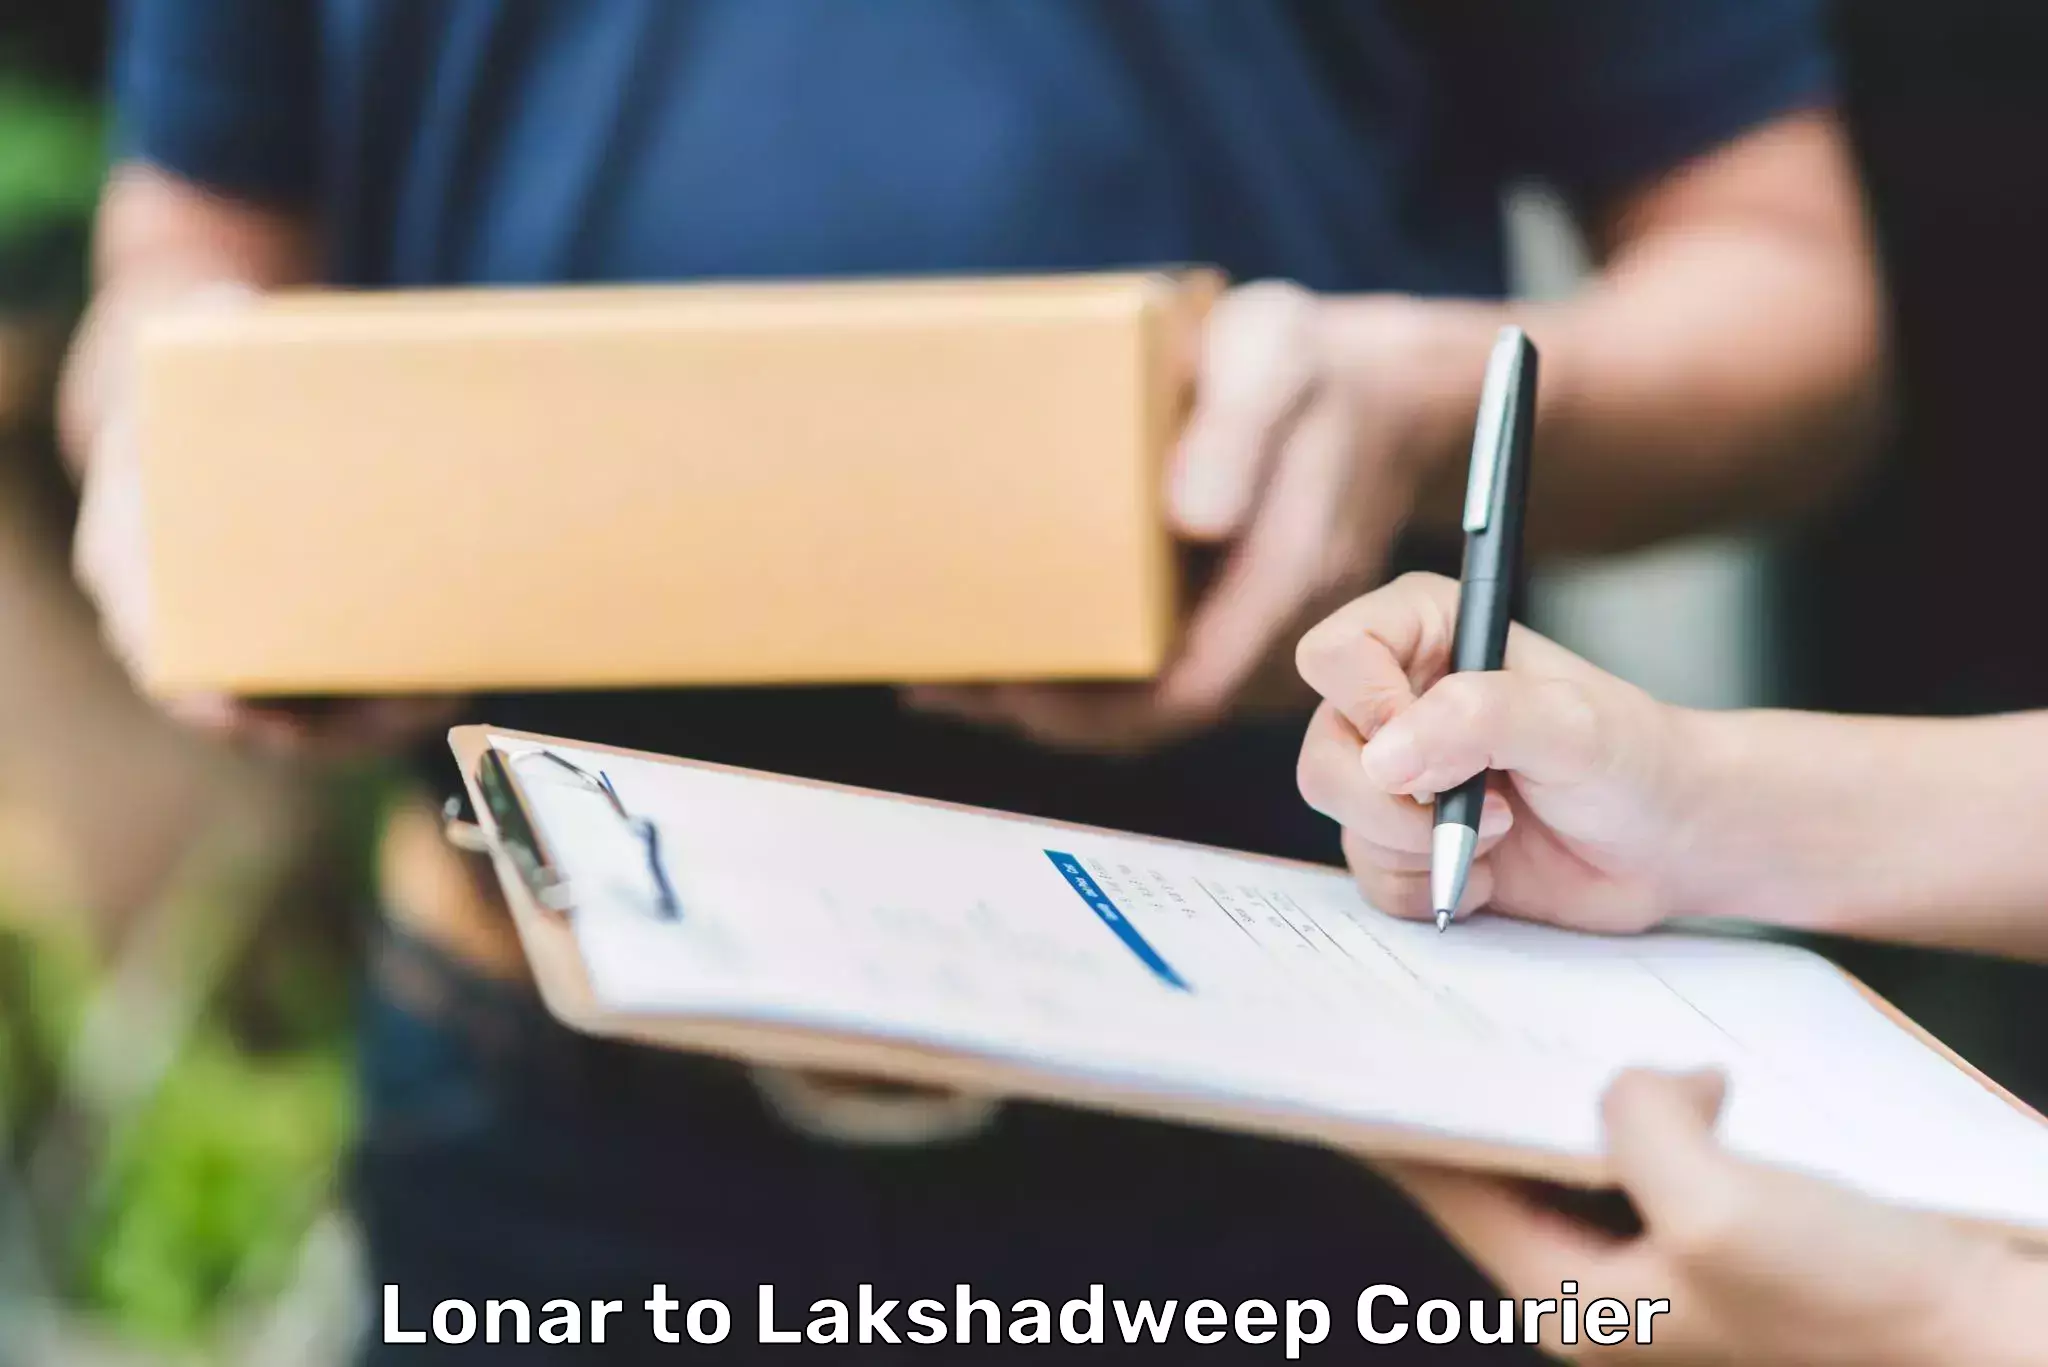 State-of-the-art courier technology Lonar to Lakshadweep